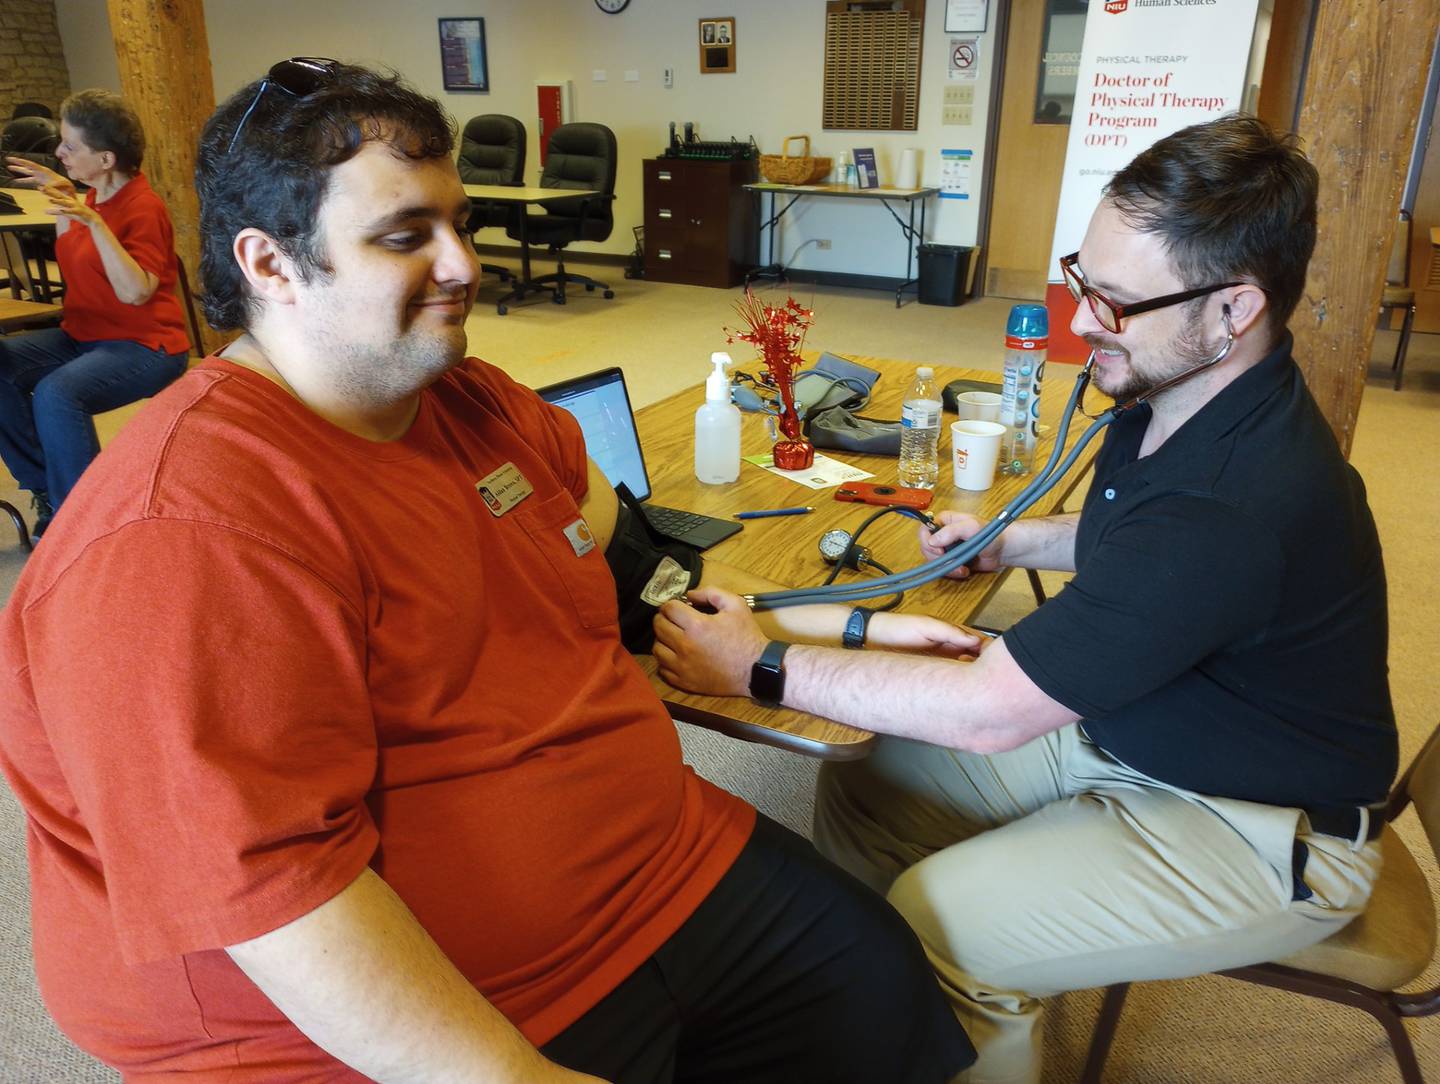 NIU physical therapy student Josh Starner demonstrates a blood pressure check on fellow student Aidan Brown Saturday at the WellBatavia Festival. Several students conducted health screenings, such as speech and language, speech and Batavia's downtown accessibility.